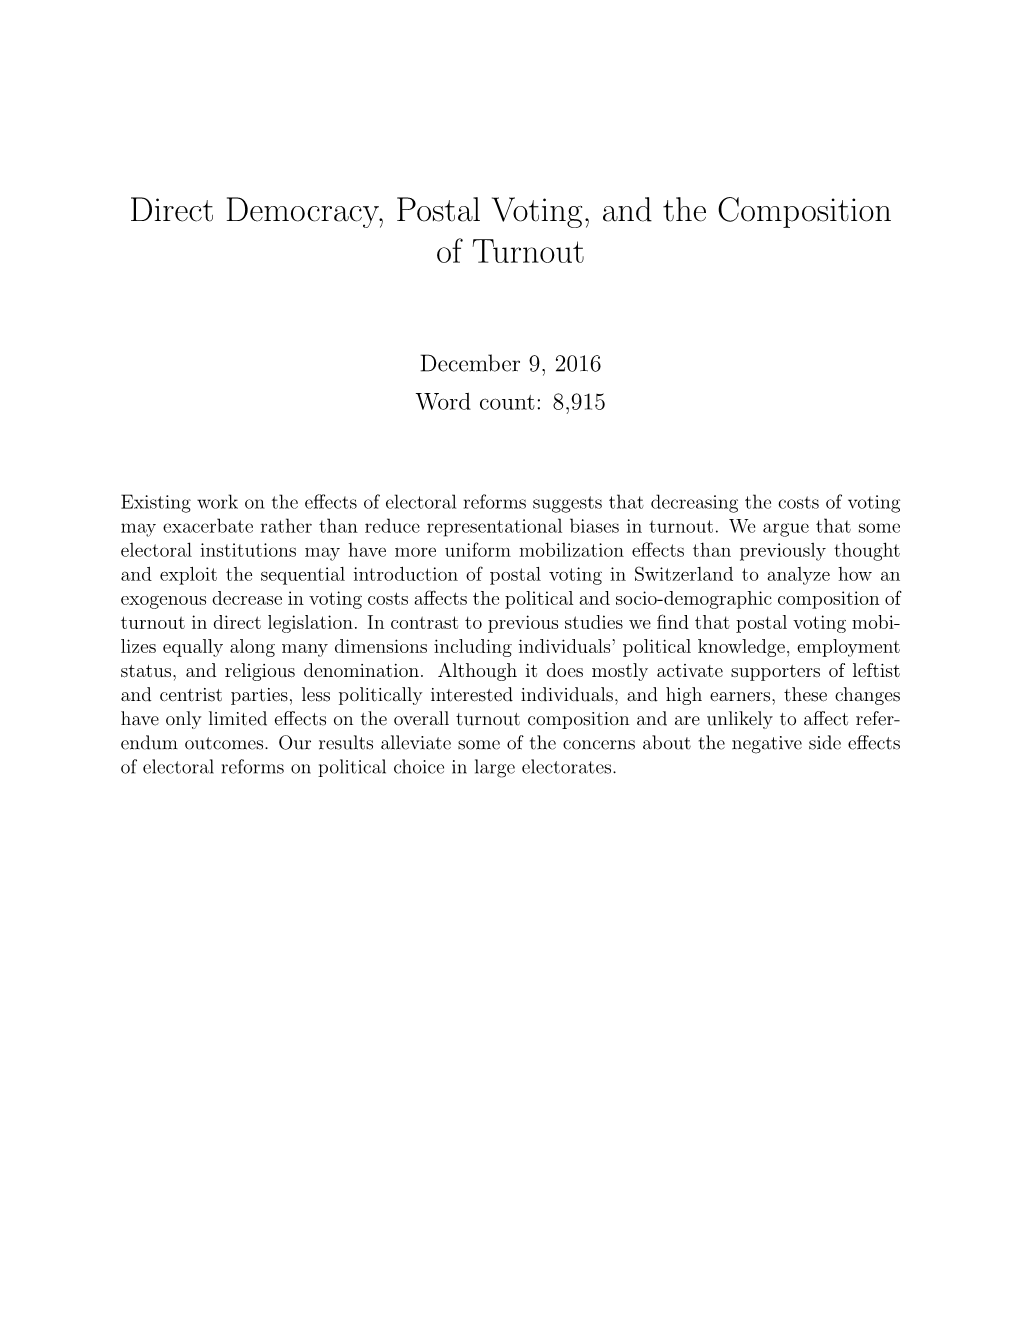 Direct Democracy, Postal Voting, and the Composition of Turnout